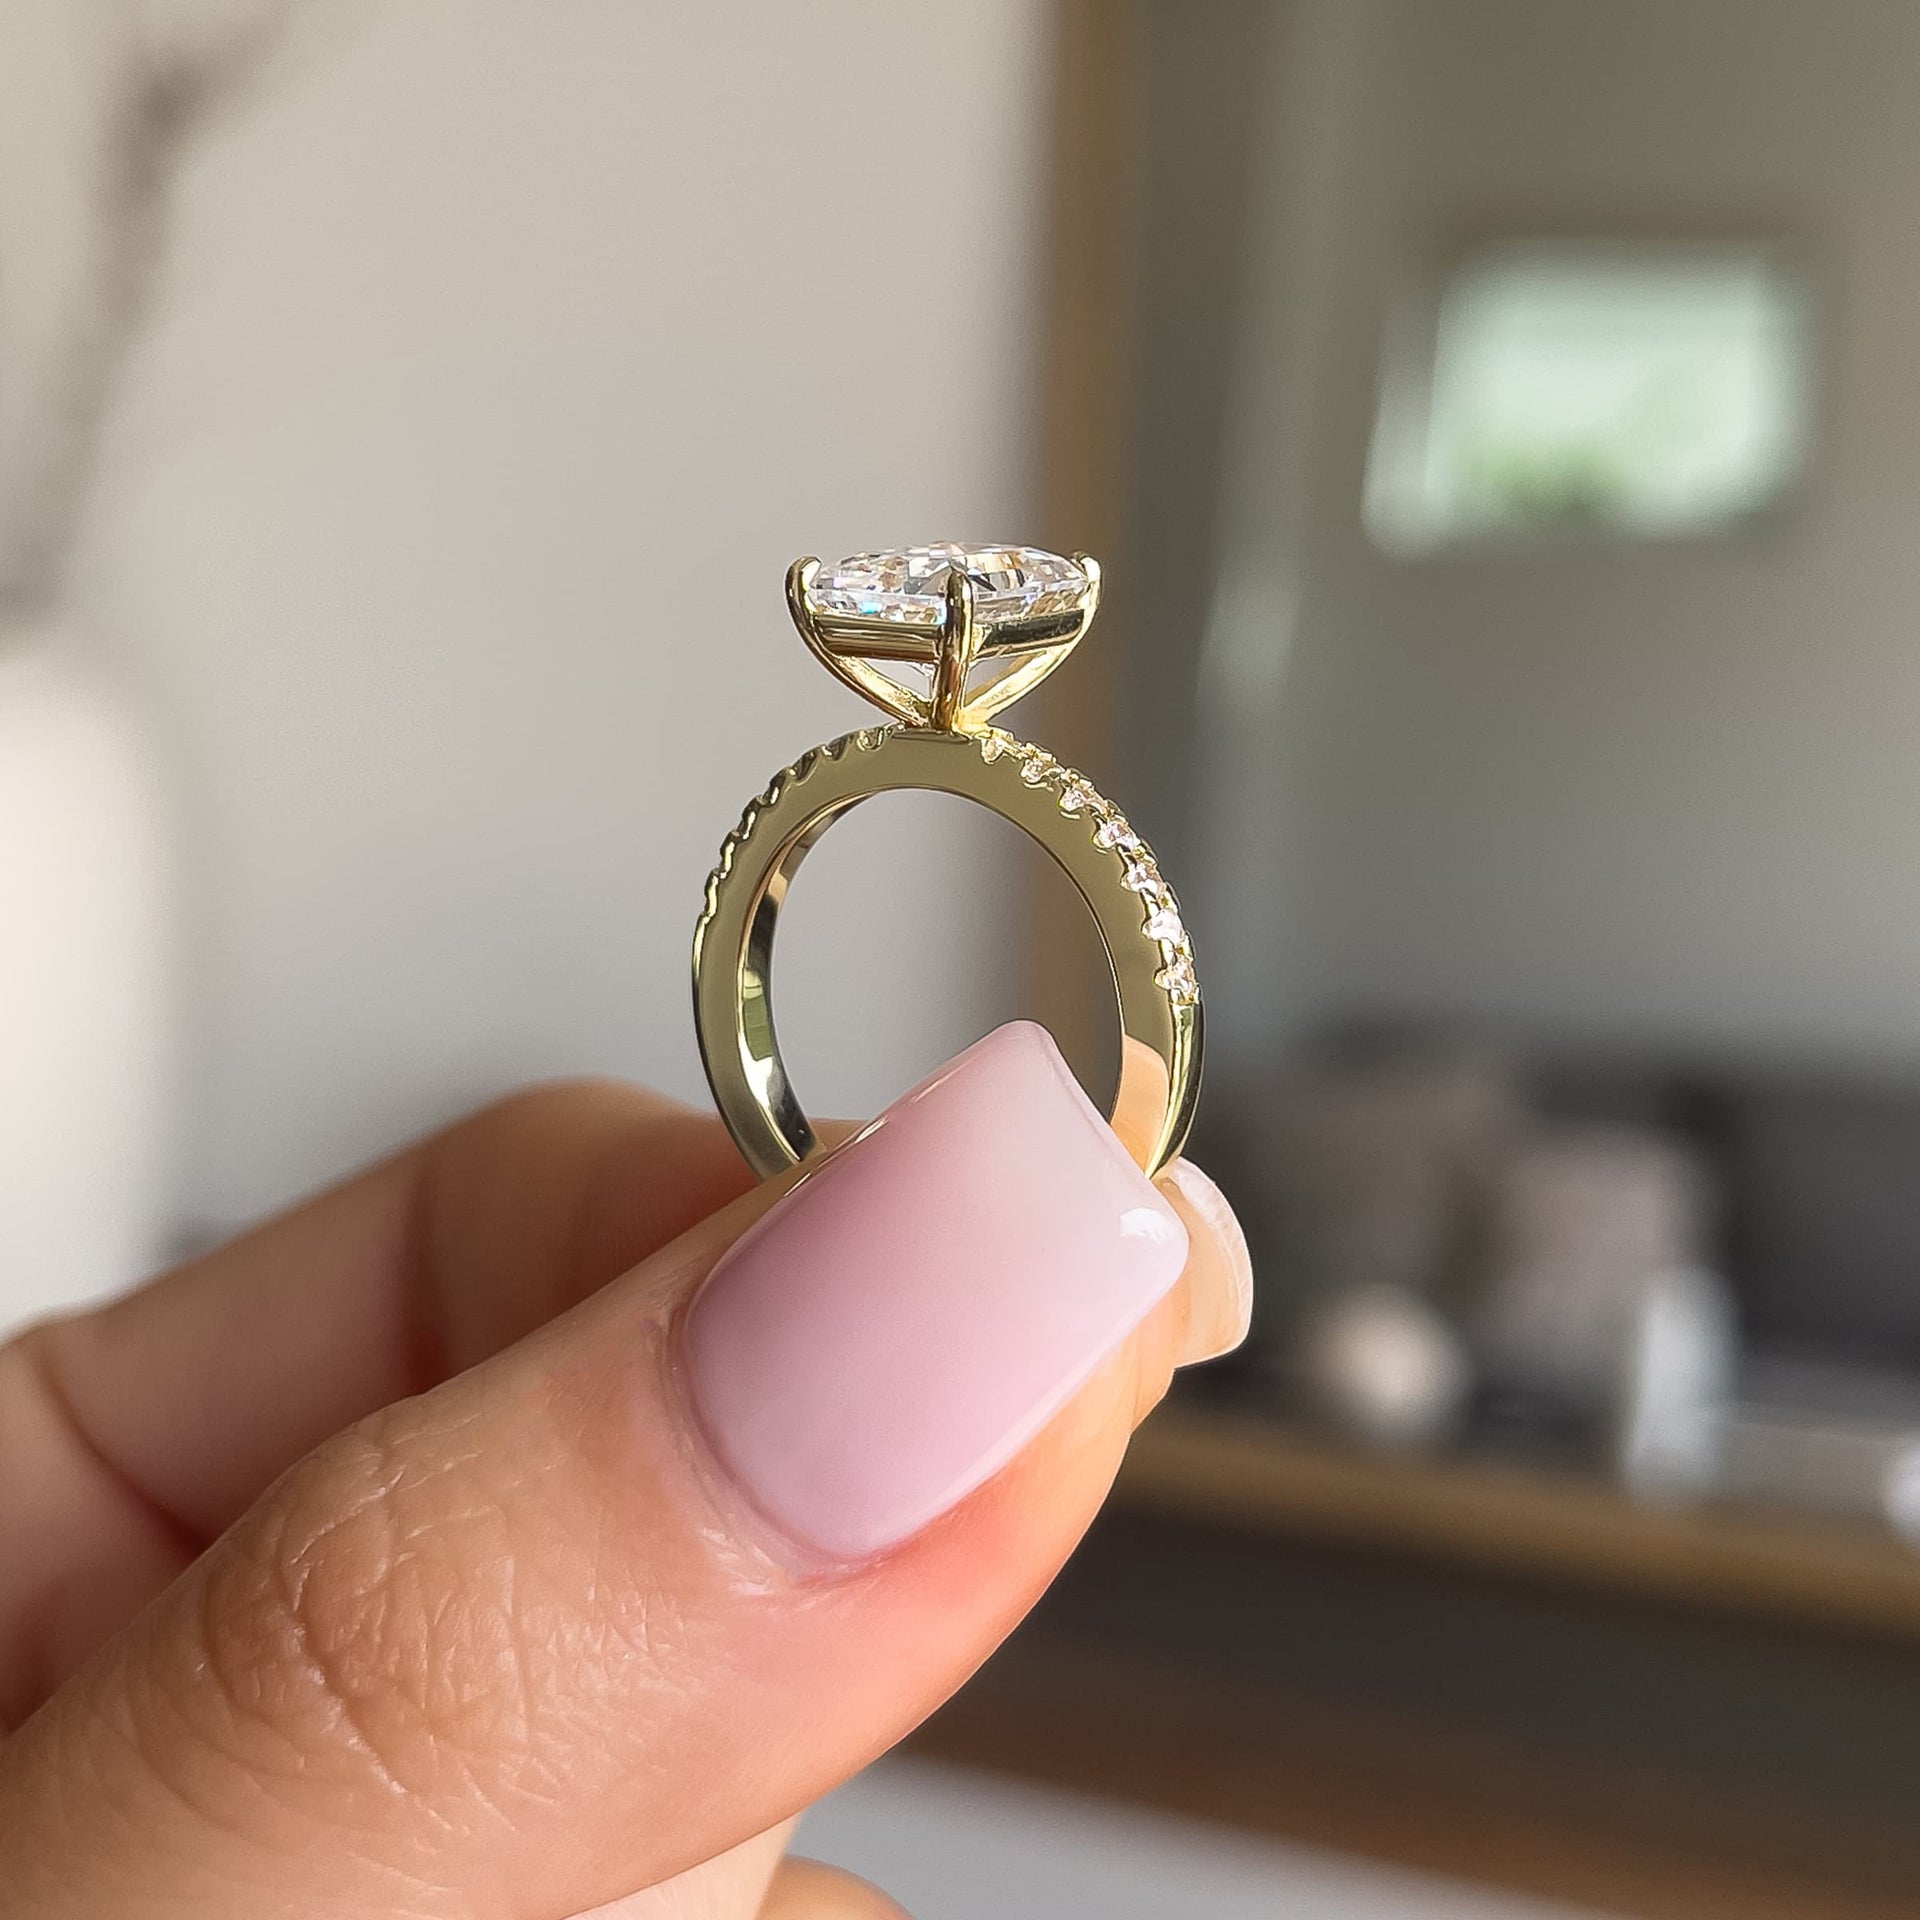 Side profile of gold radiant cut engagement ring with half eternity band detailing with neutral background